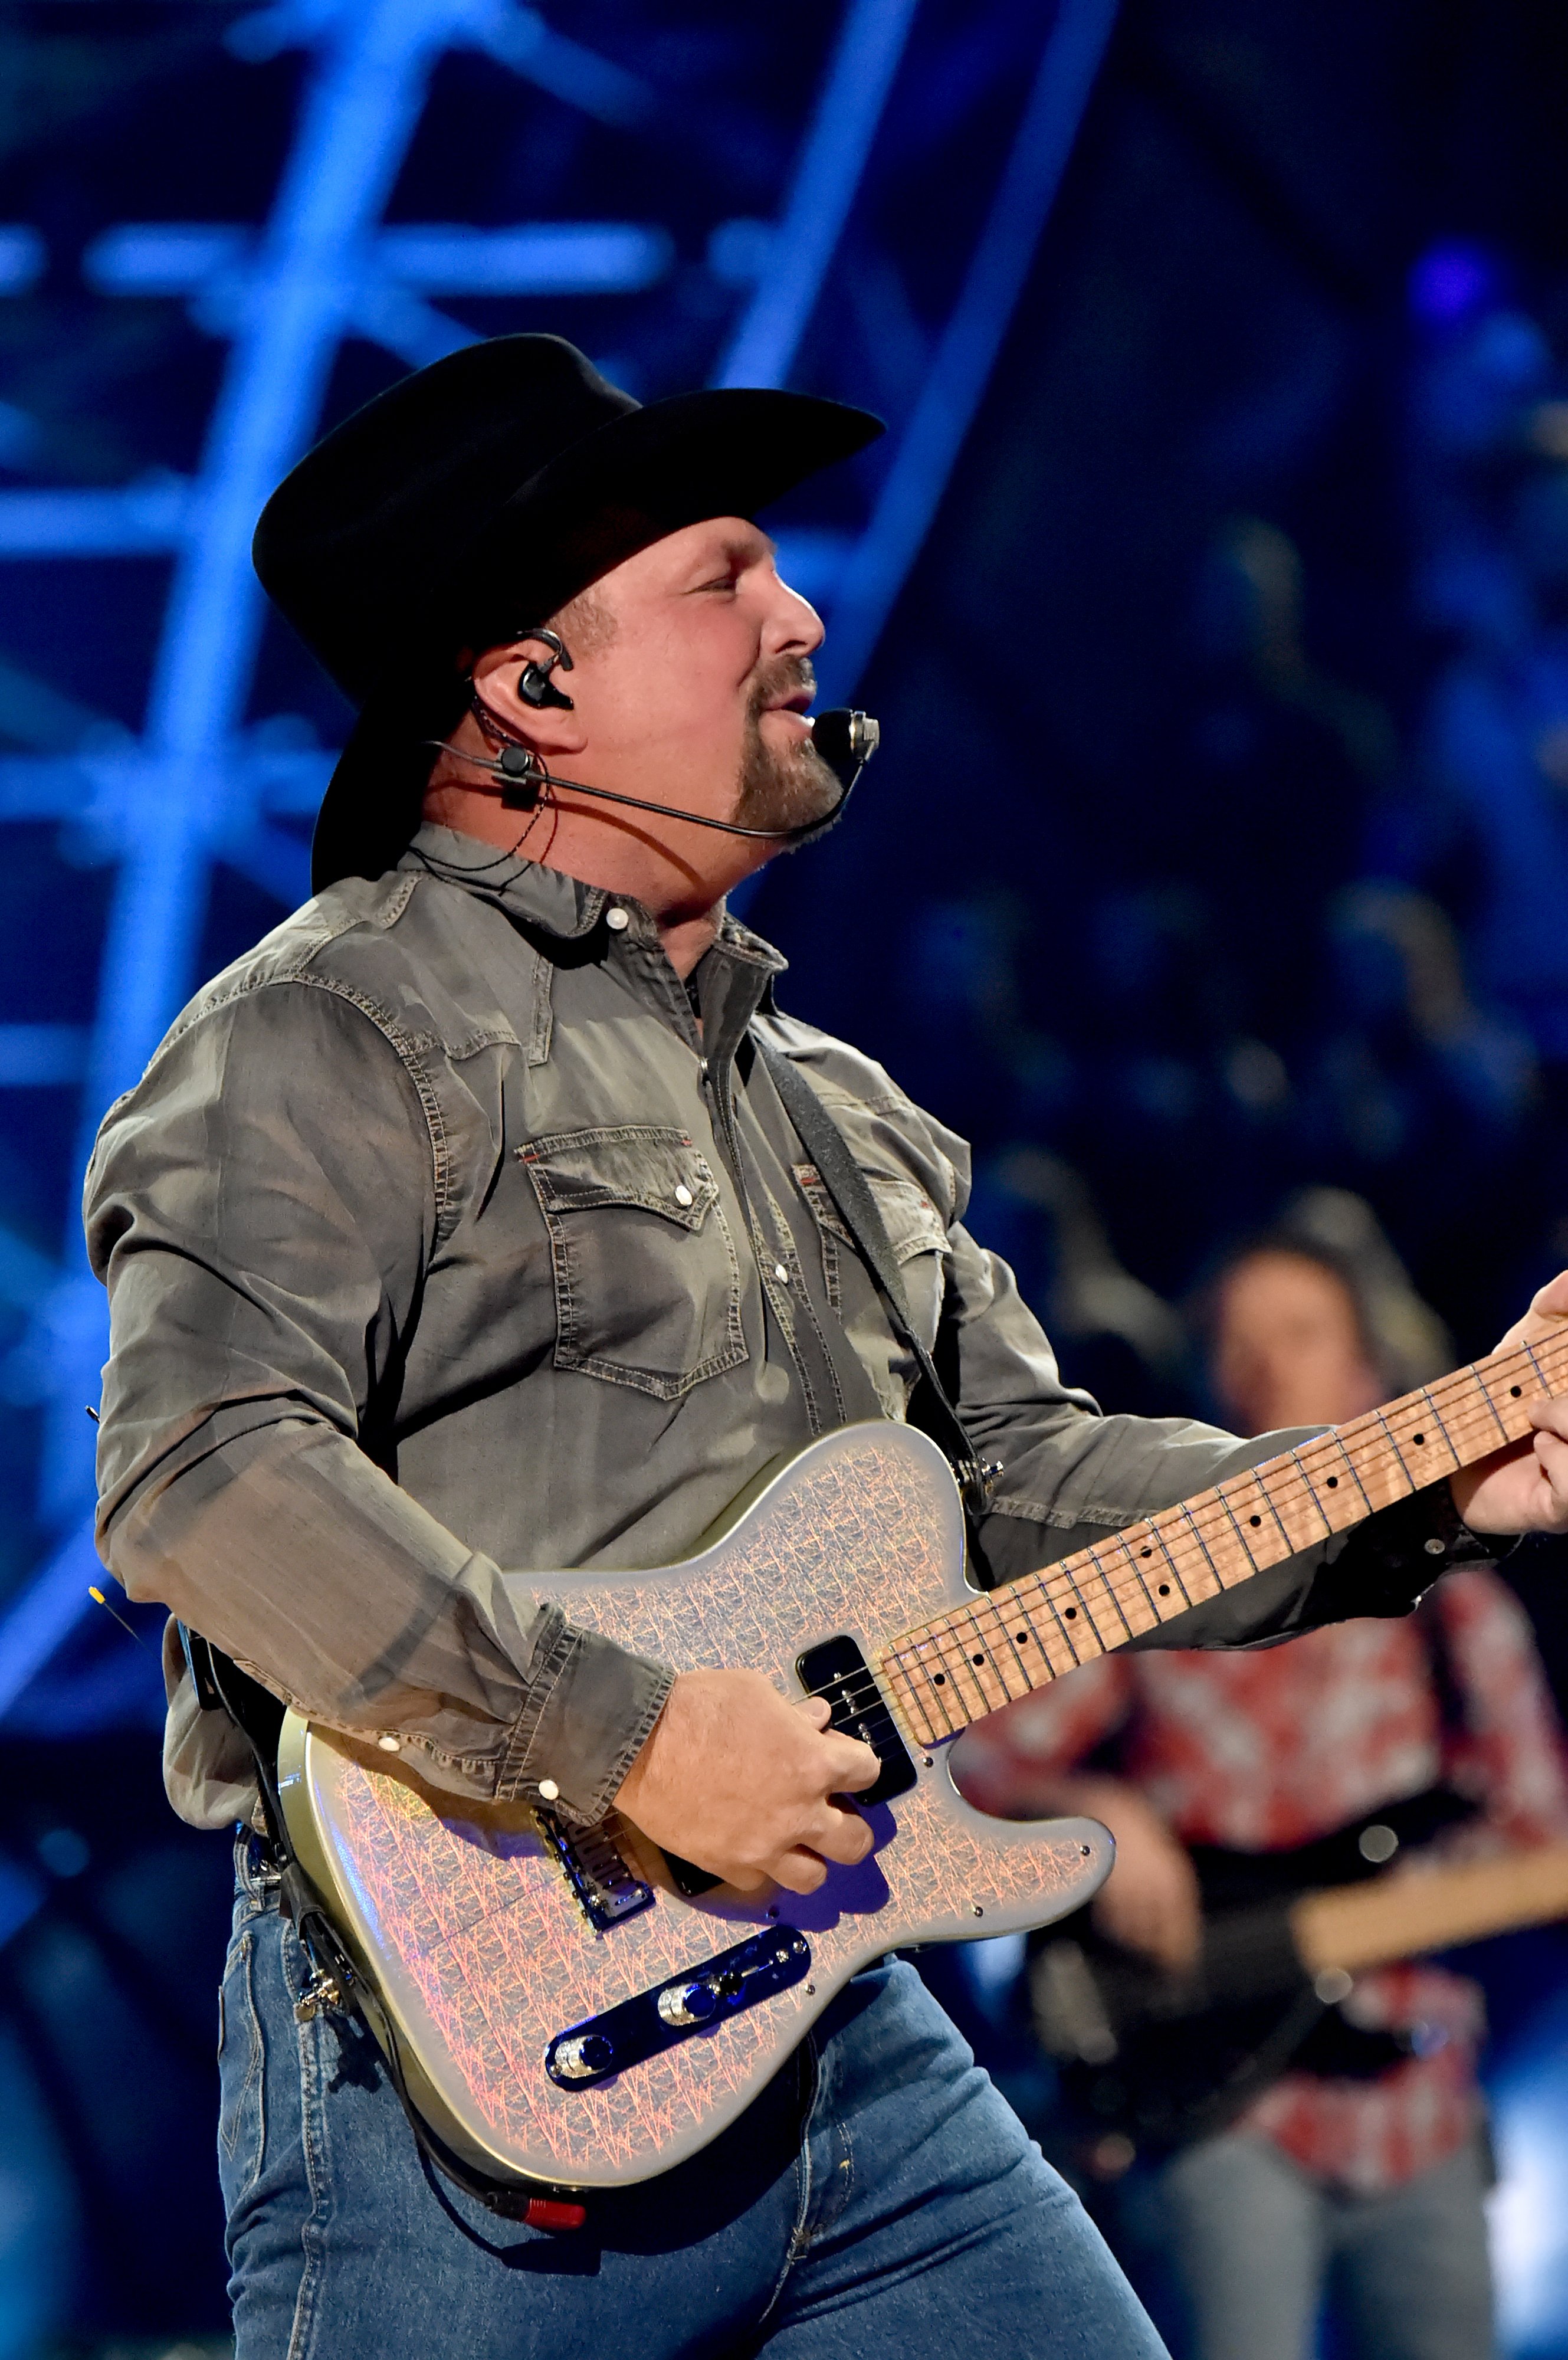 Garth Brooks performs on stage at the 2019 iHeartRadio Music Awards which broadcasted live on FOX at the Microsoft Theater on March 14, 2019 in Los Angeles, California. | Source: Getty Images